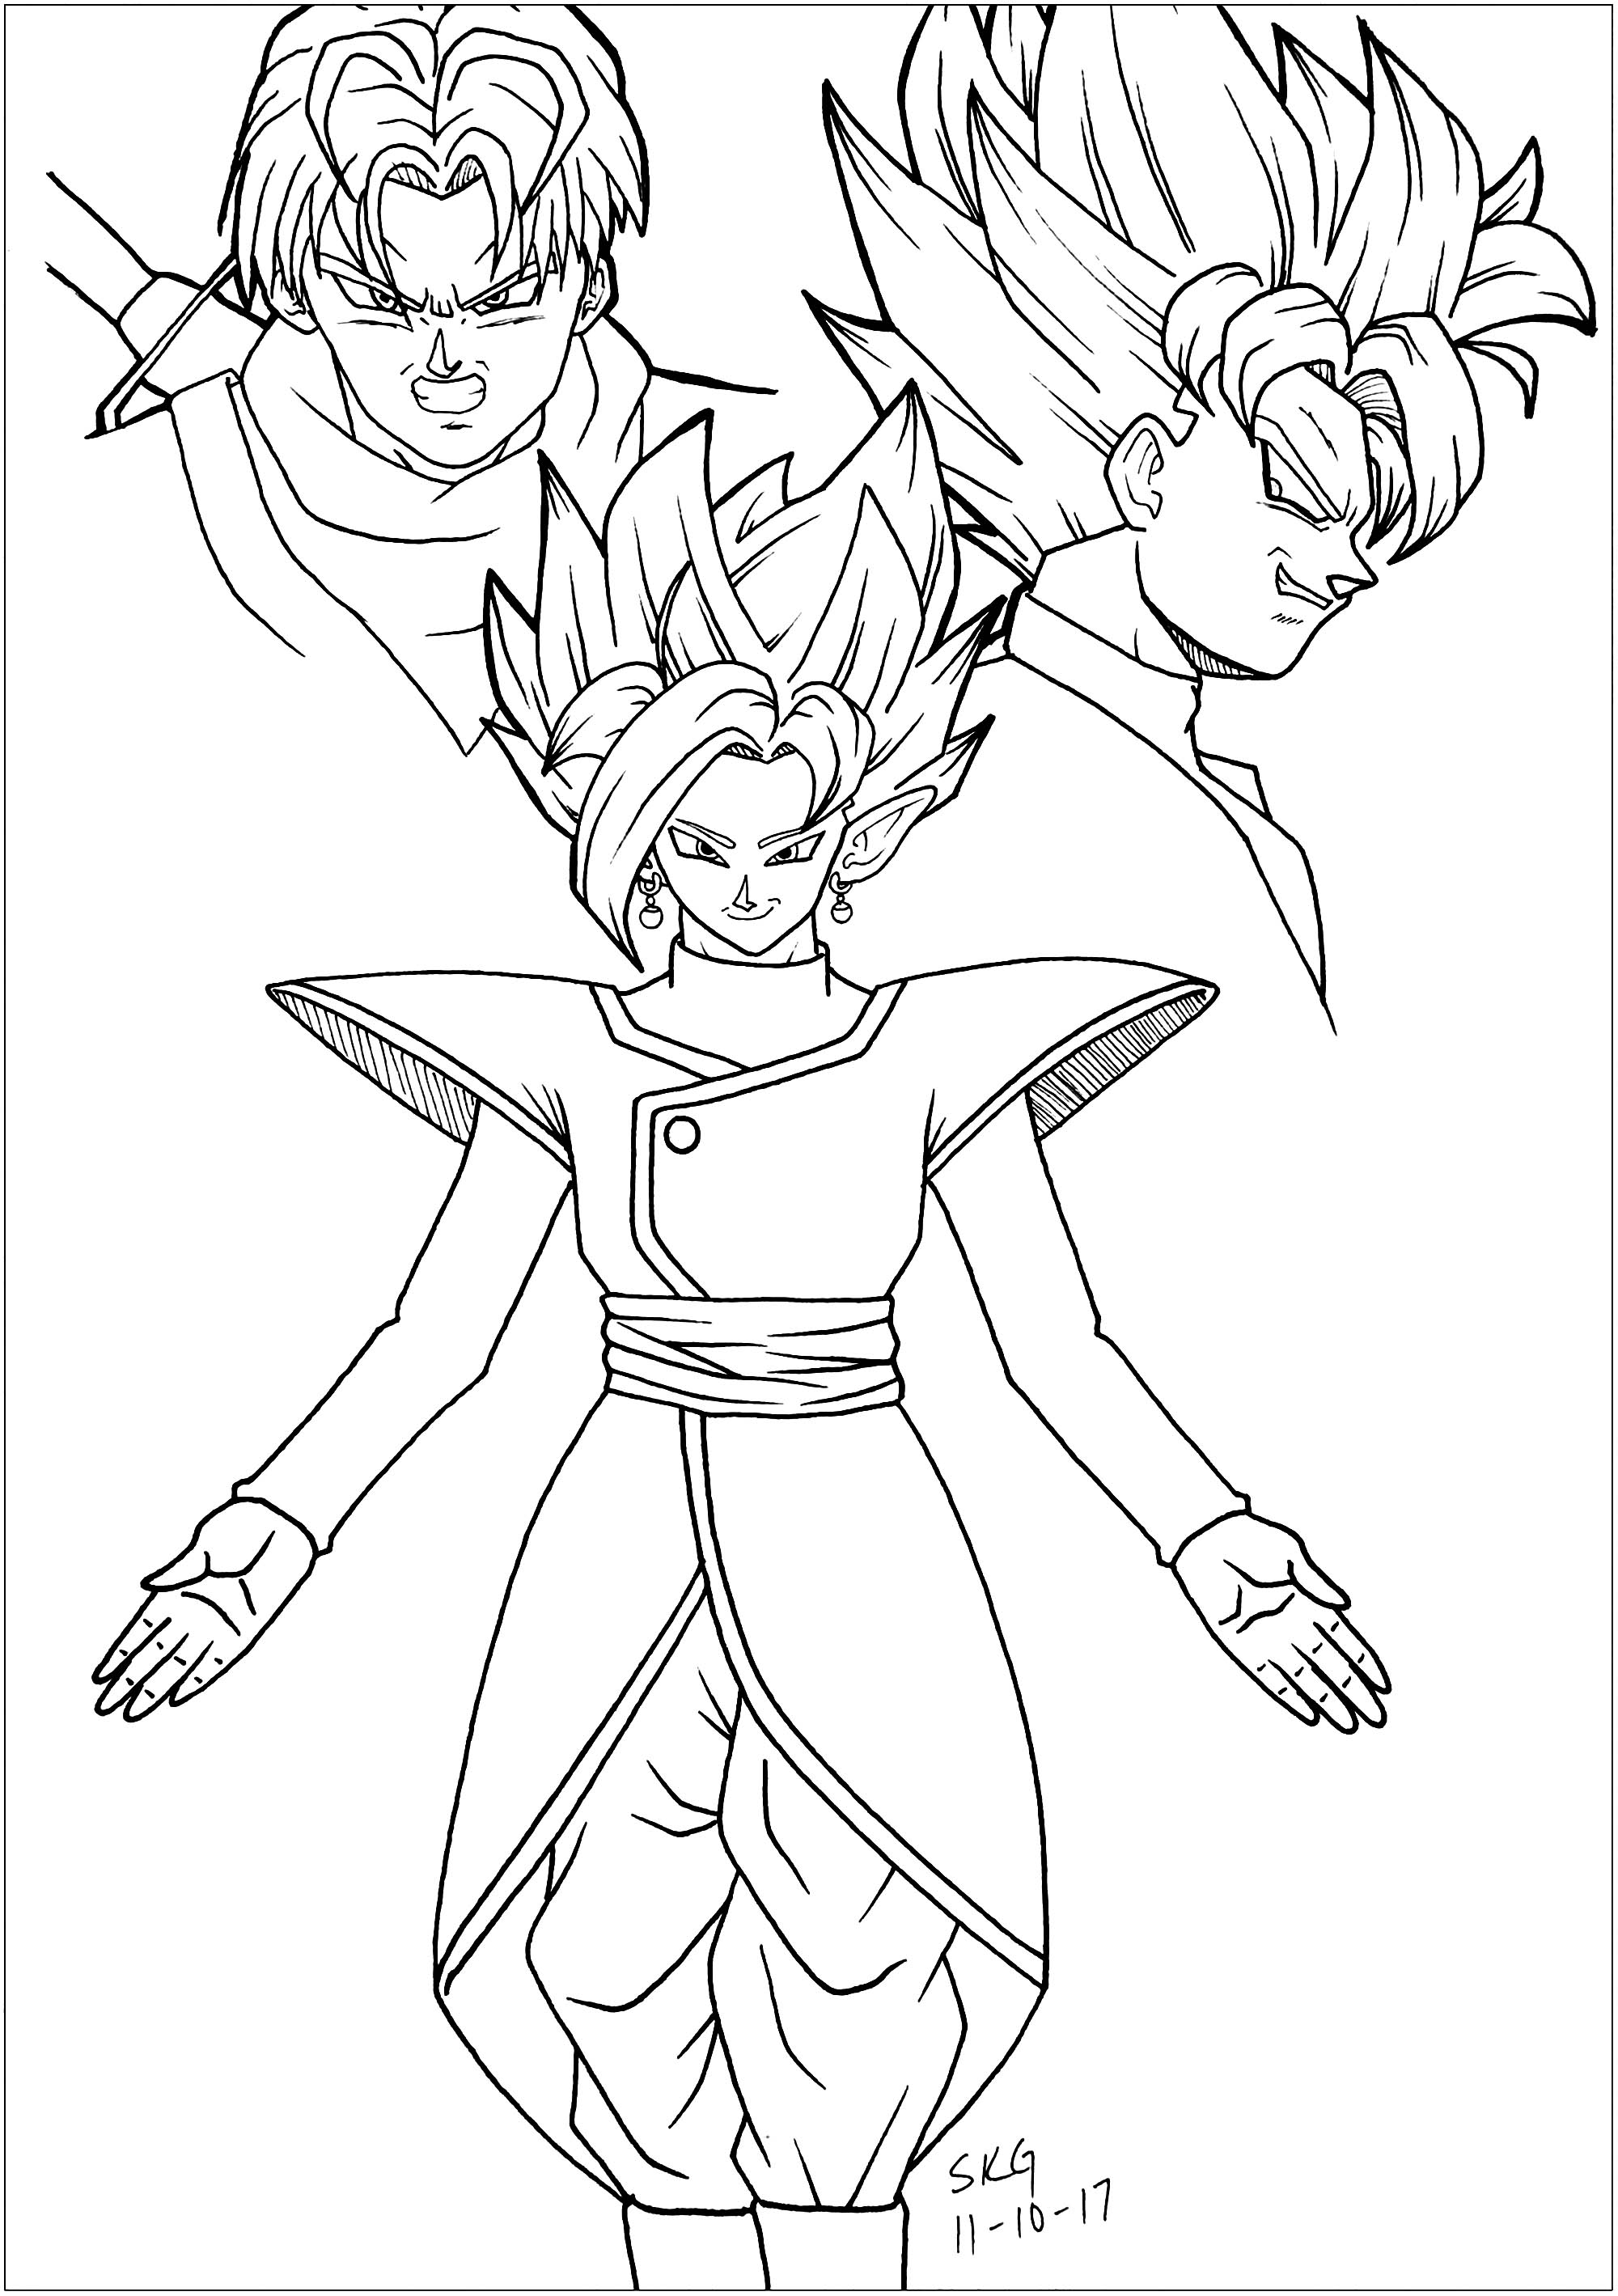 Dragon Ball Super coloring page with few details for kids : Black Goku , Trunks and Zamasu